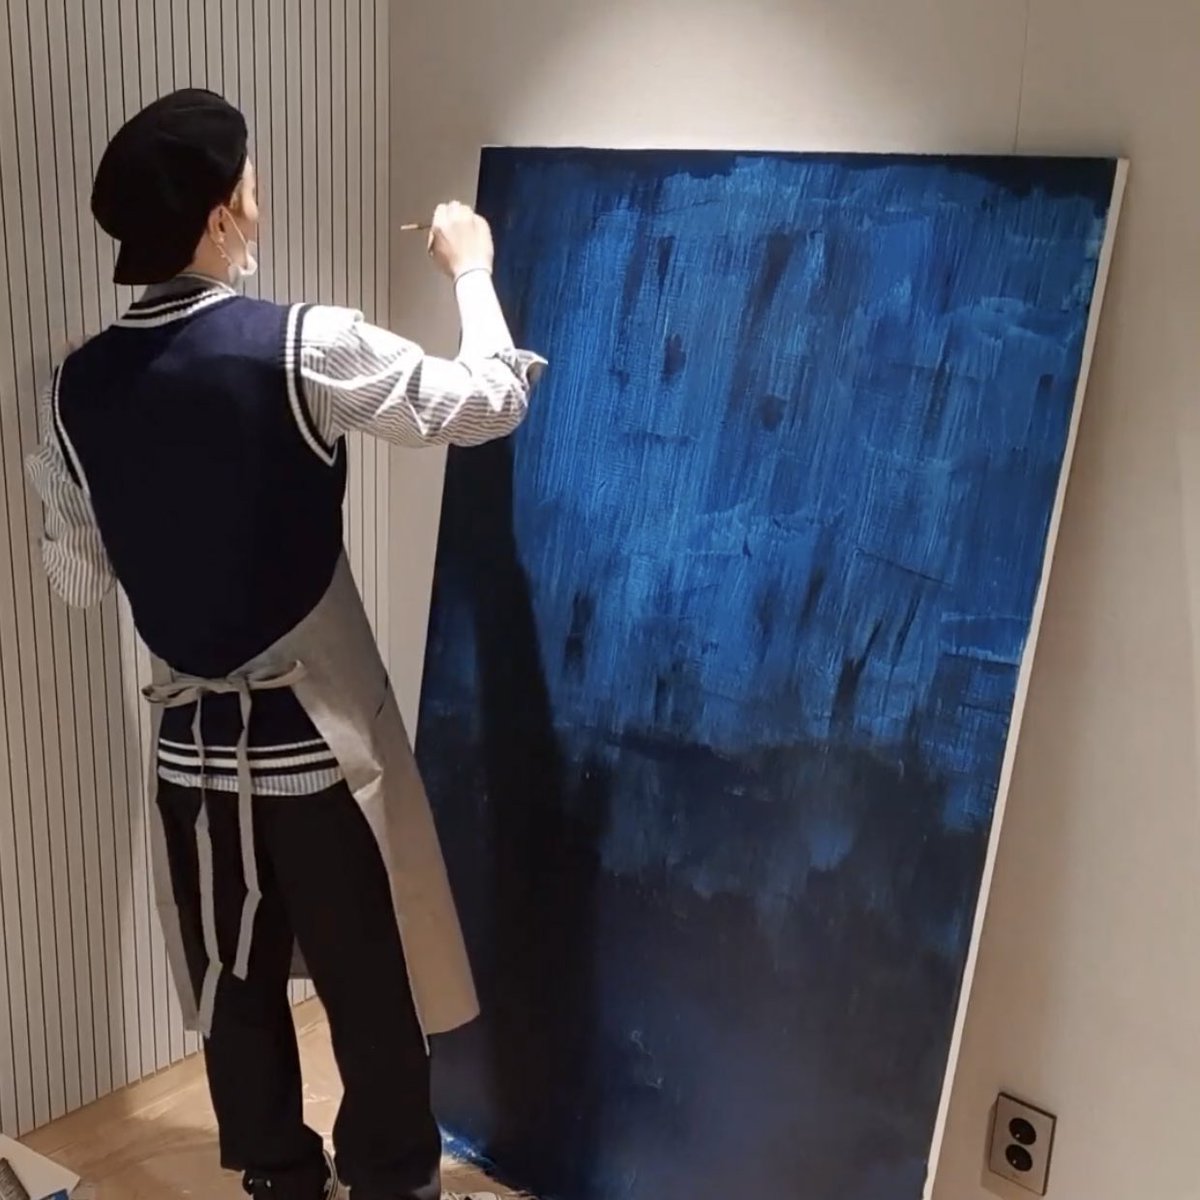 yoongi a simple-but-with-depth manhe relies on big and harsh brush strokes, very simplistic colour palette. bc painting is about capturing a moment and expressing, he’s the type to paint what he feels, maybe atm or a certain point in his life that he’d like to rmb